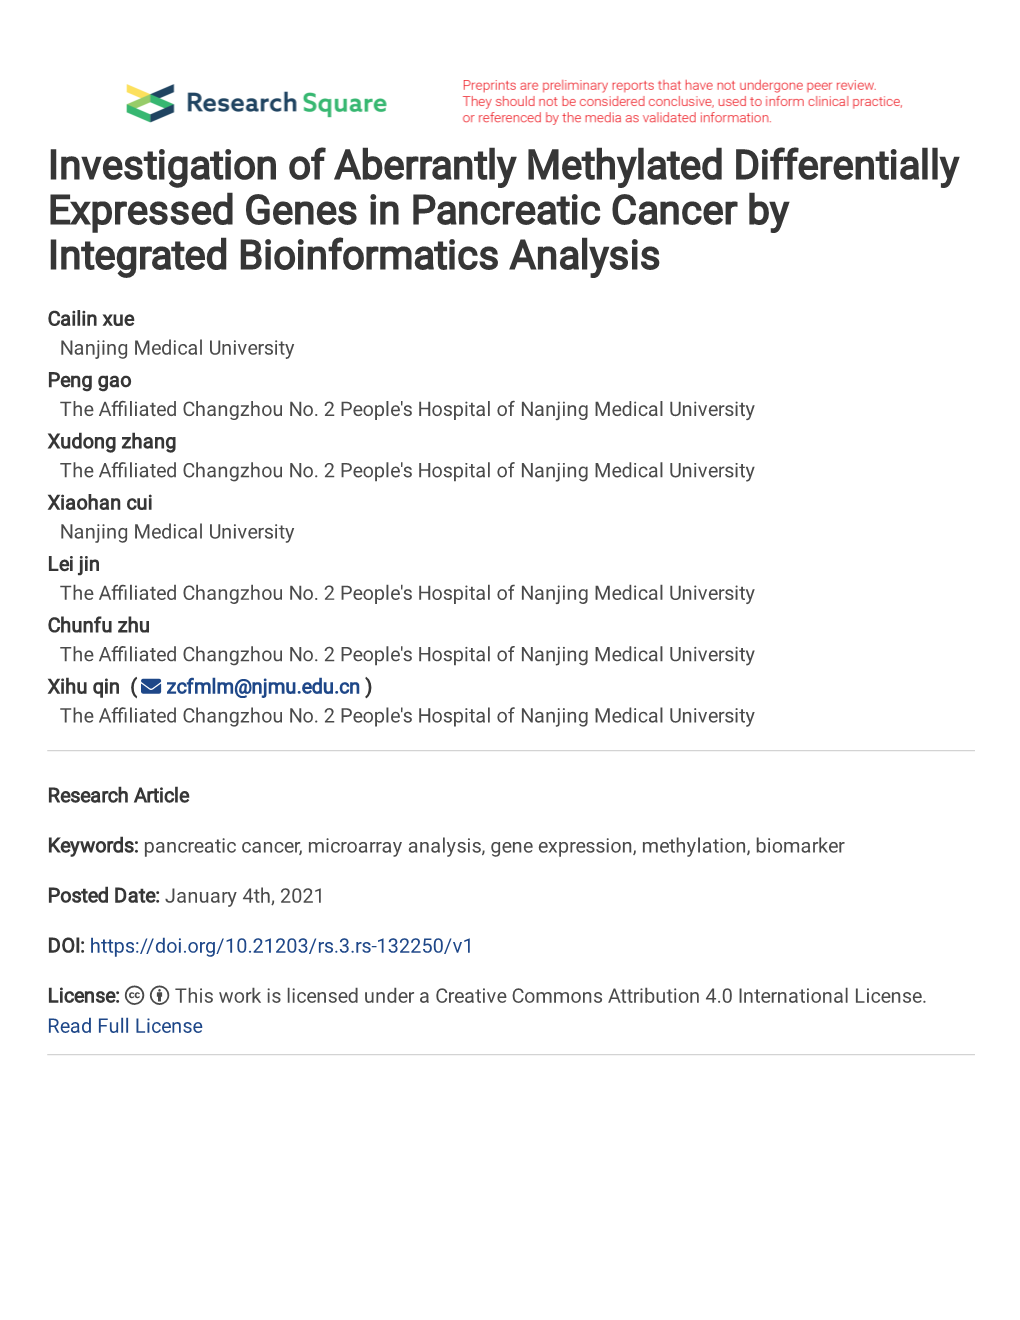 Investigation of Aberrantly Methylated Differentially Expressed Genes in Pancreatic Cancer by Integrated Bioinformatics Analysis